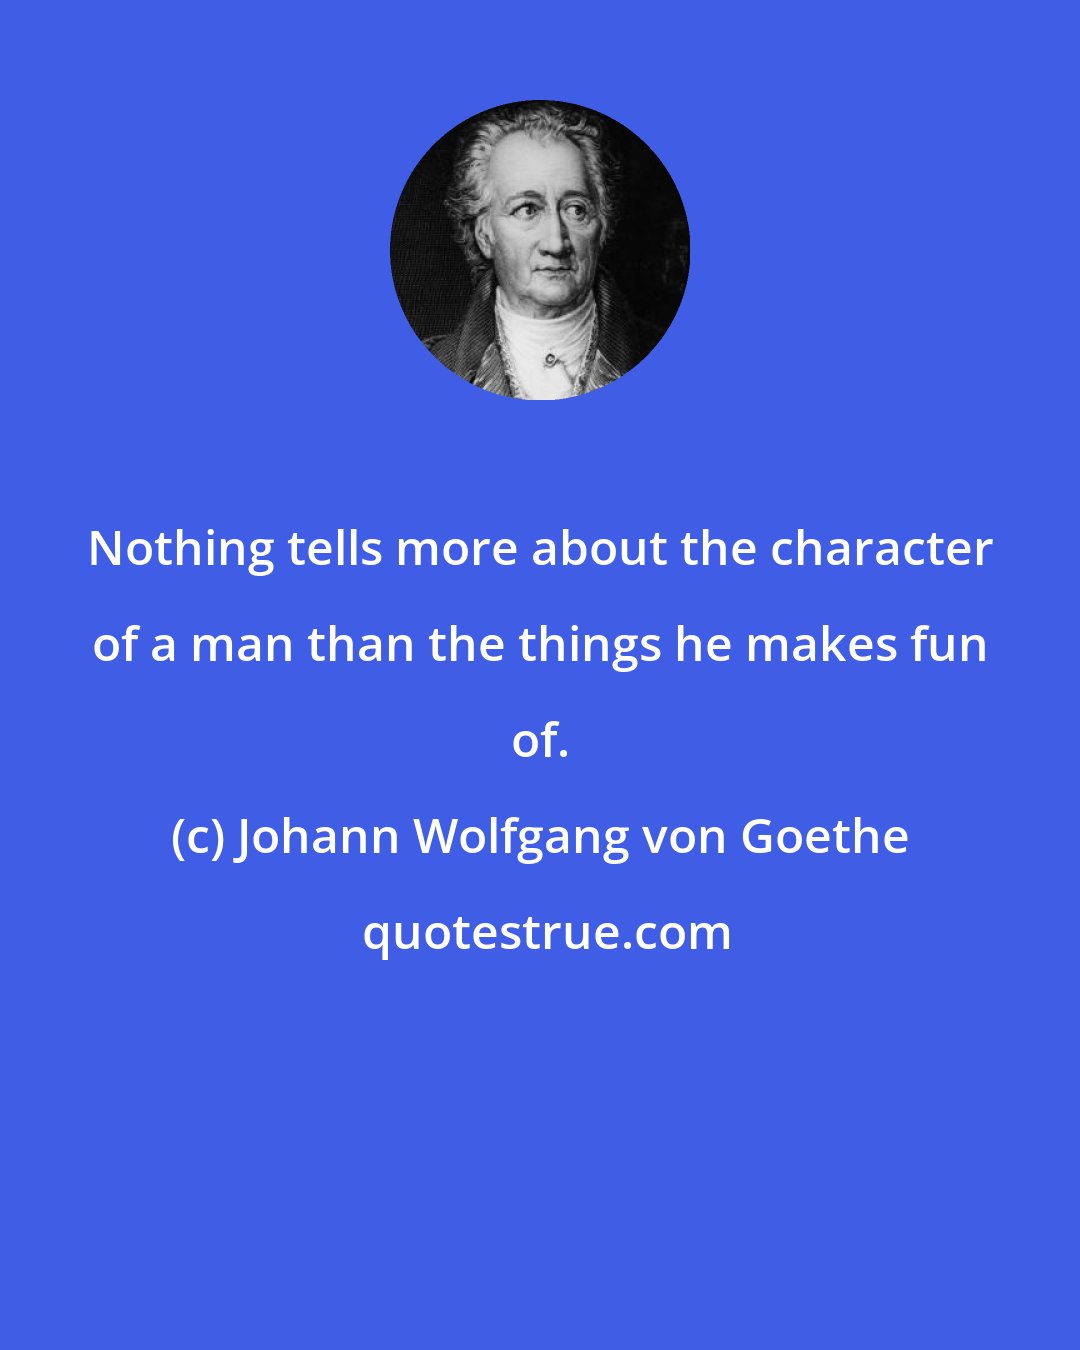 Johann Wolfgang von Goethe: Nothing tells more about the character of a man than the things he makes fun of.